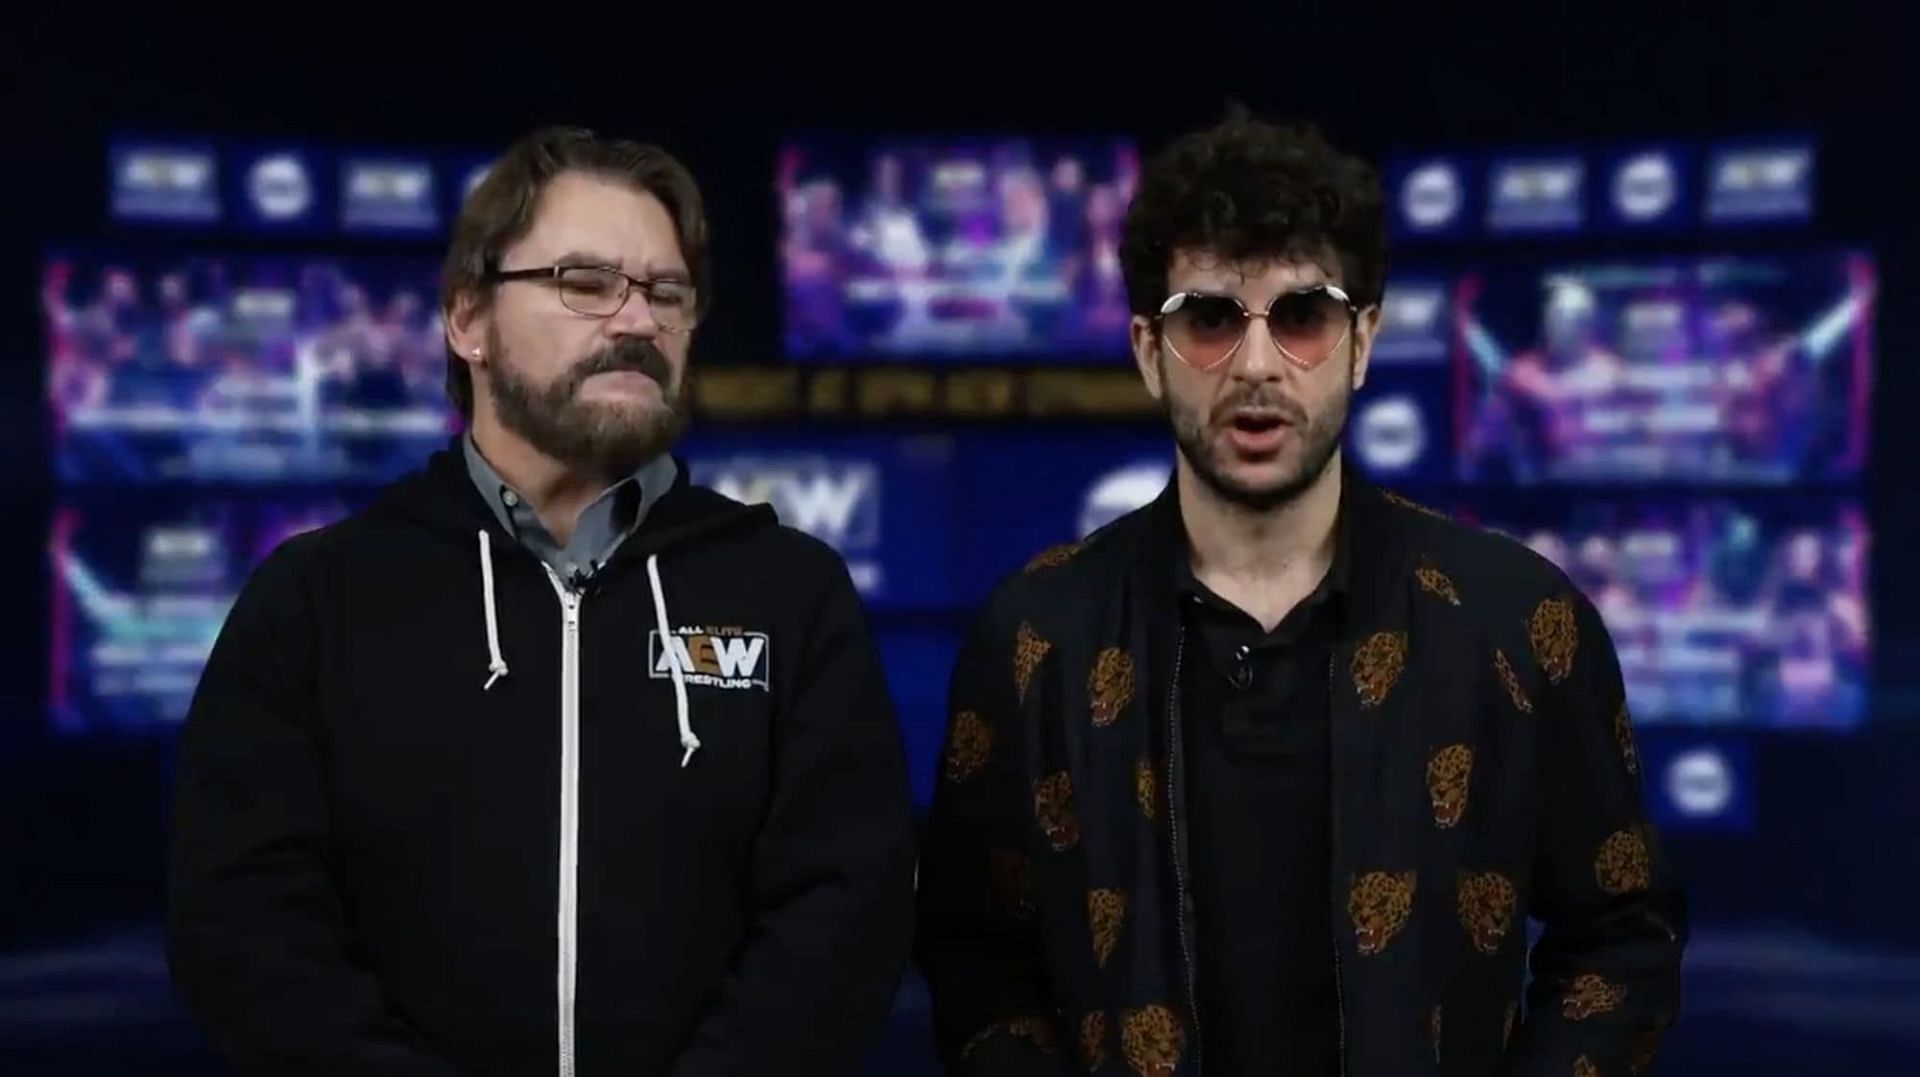 Tony Khan provided an update on the AEW-IMPACT relationship